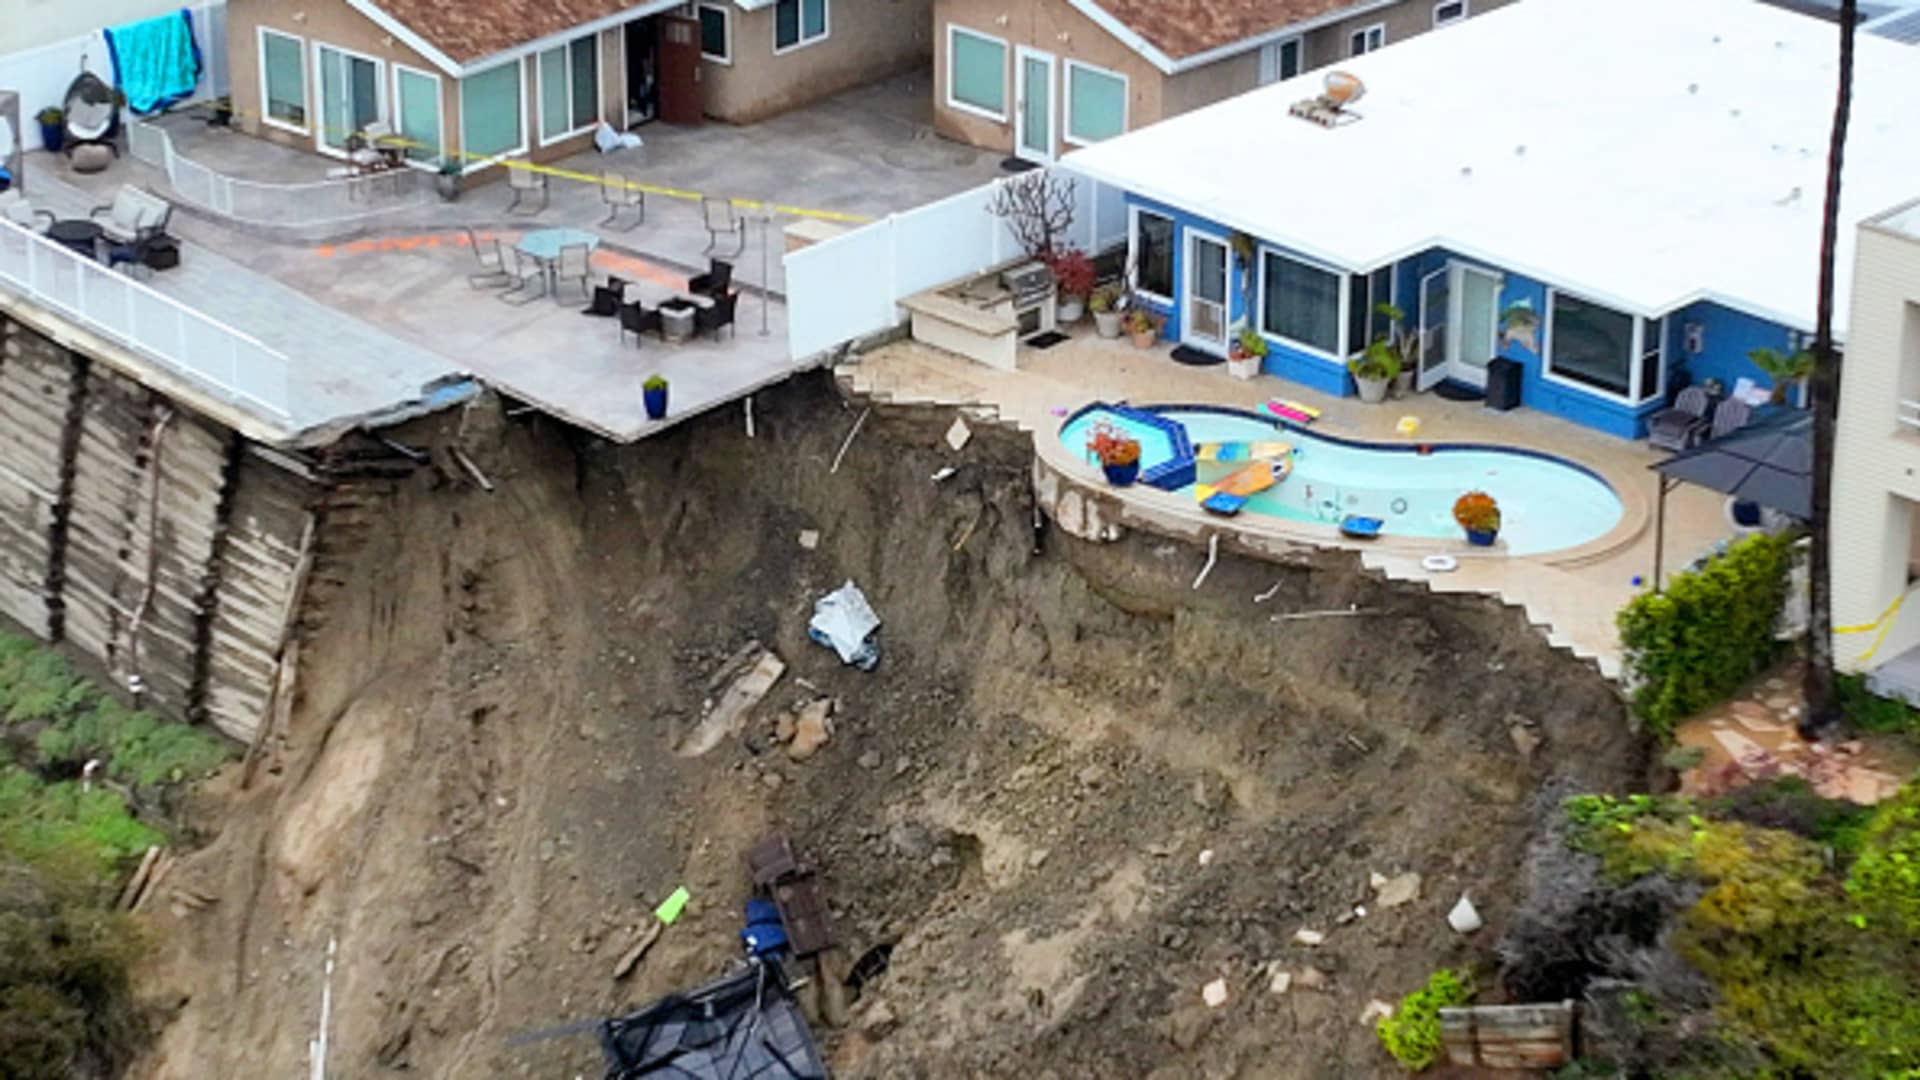 An aerial view of four cliff-side, ocean-view apartment buildings that were evacuated and tagged after heavy rains brought on a landslide that left the rear of the buildings in danger of tumbling down the cliff on Buena Vista in San Clemente Wednesday, March 15, 2023. The bluff is still moving officials said.